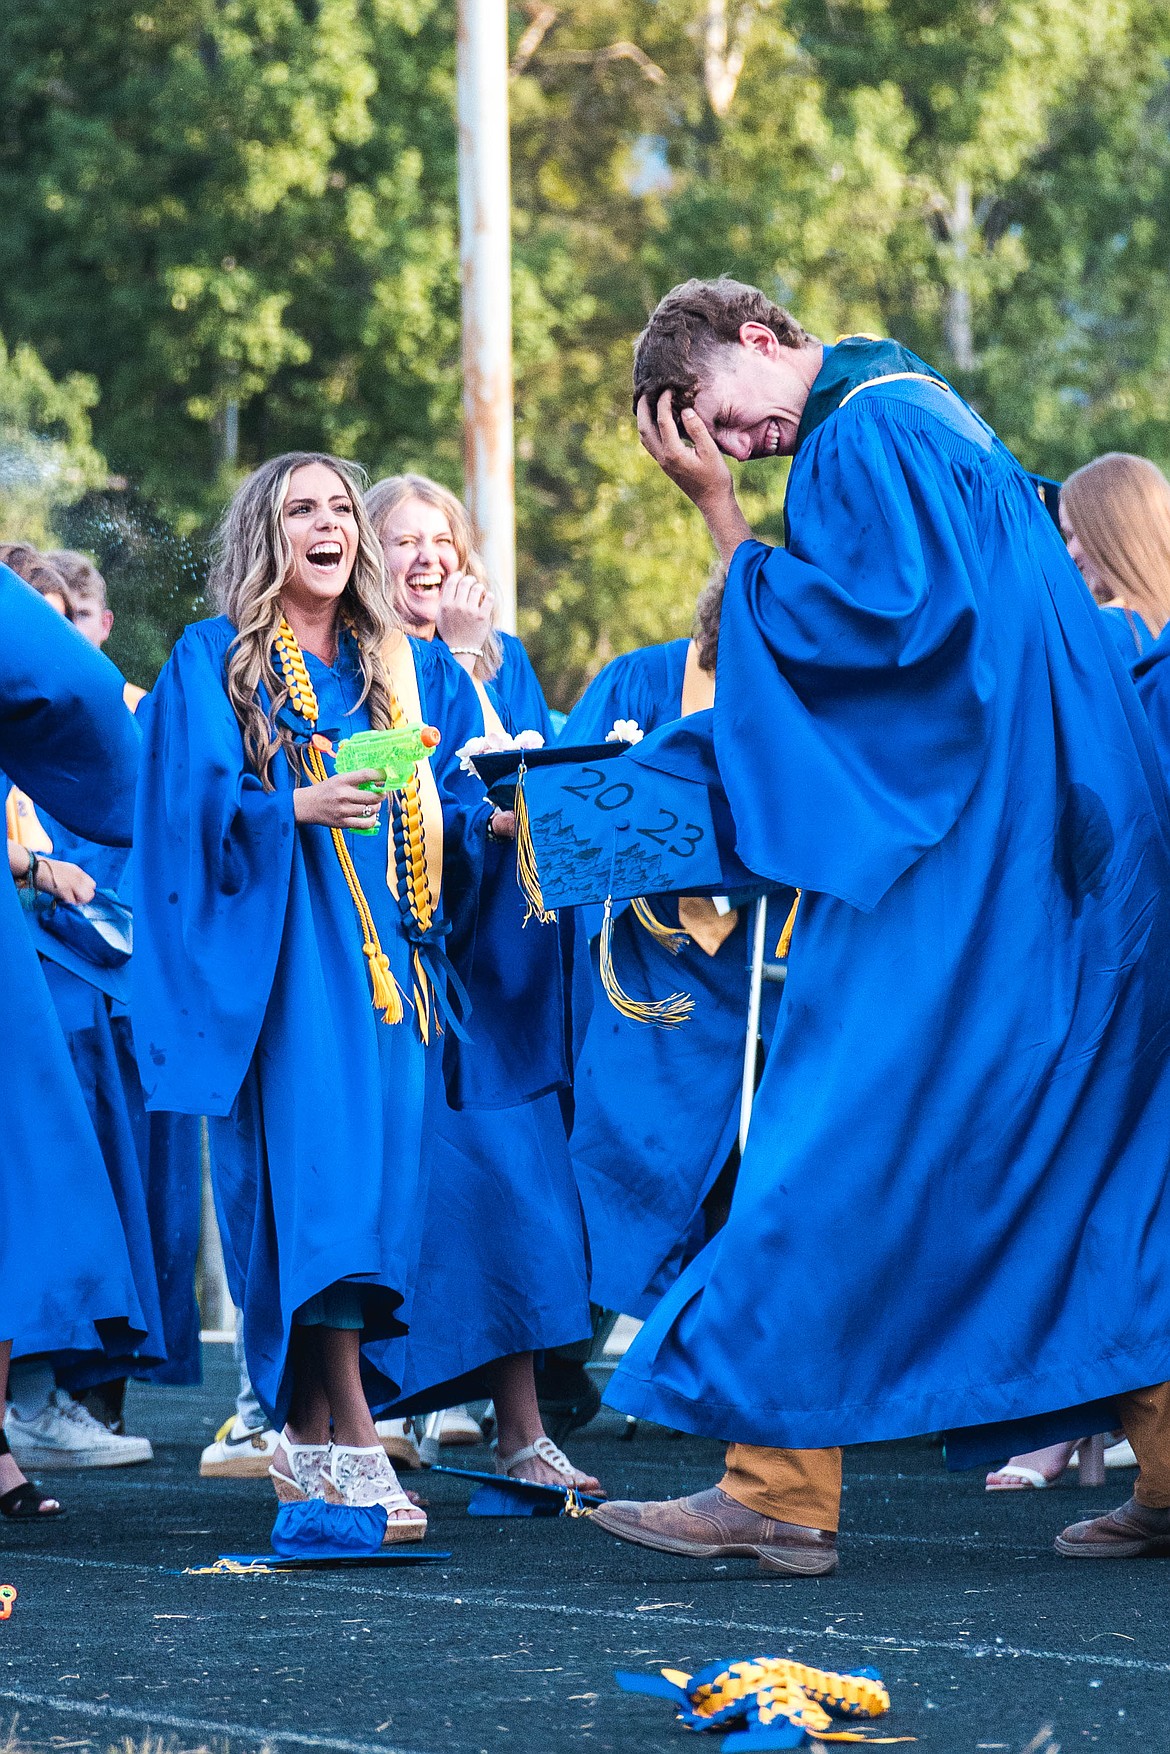 Grads pulled squirt guns from under their robes after throwing their caps in the air.